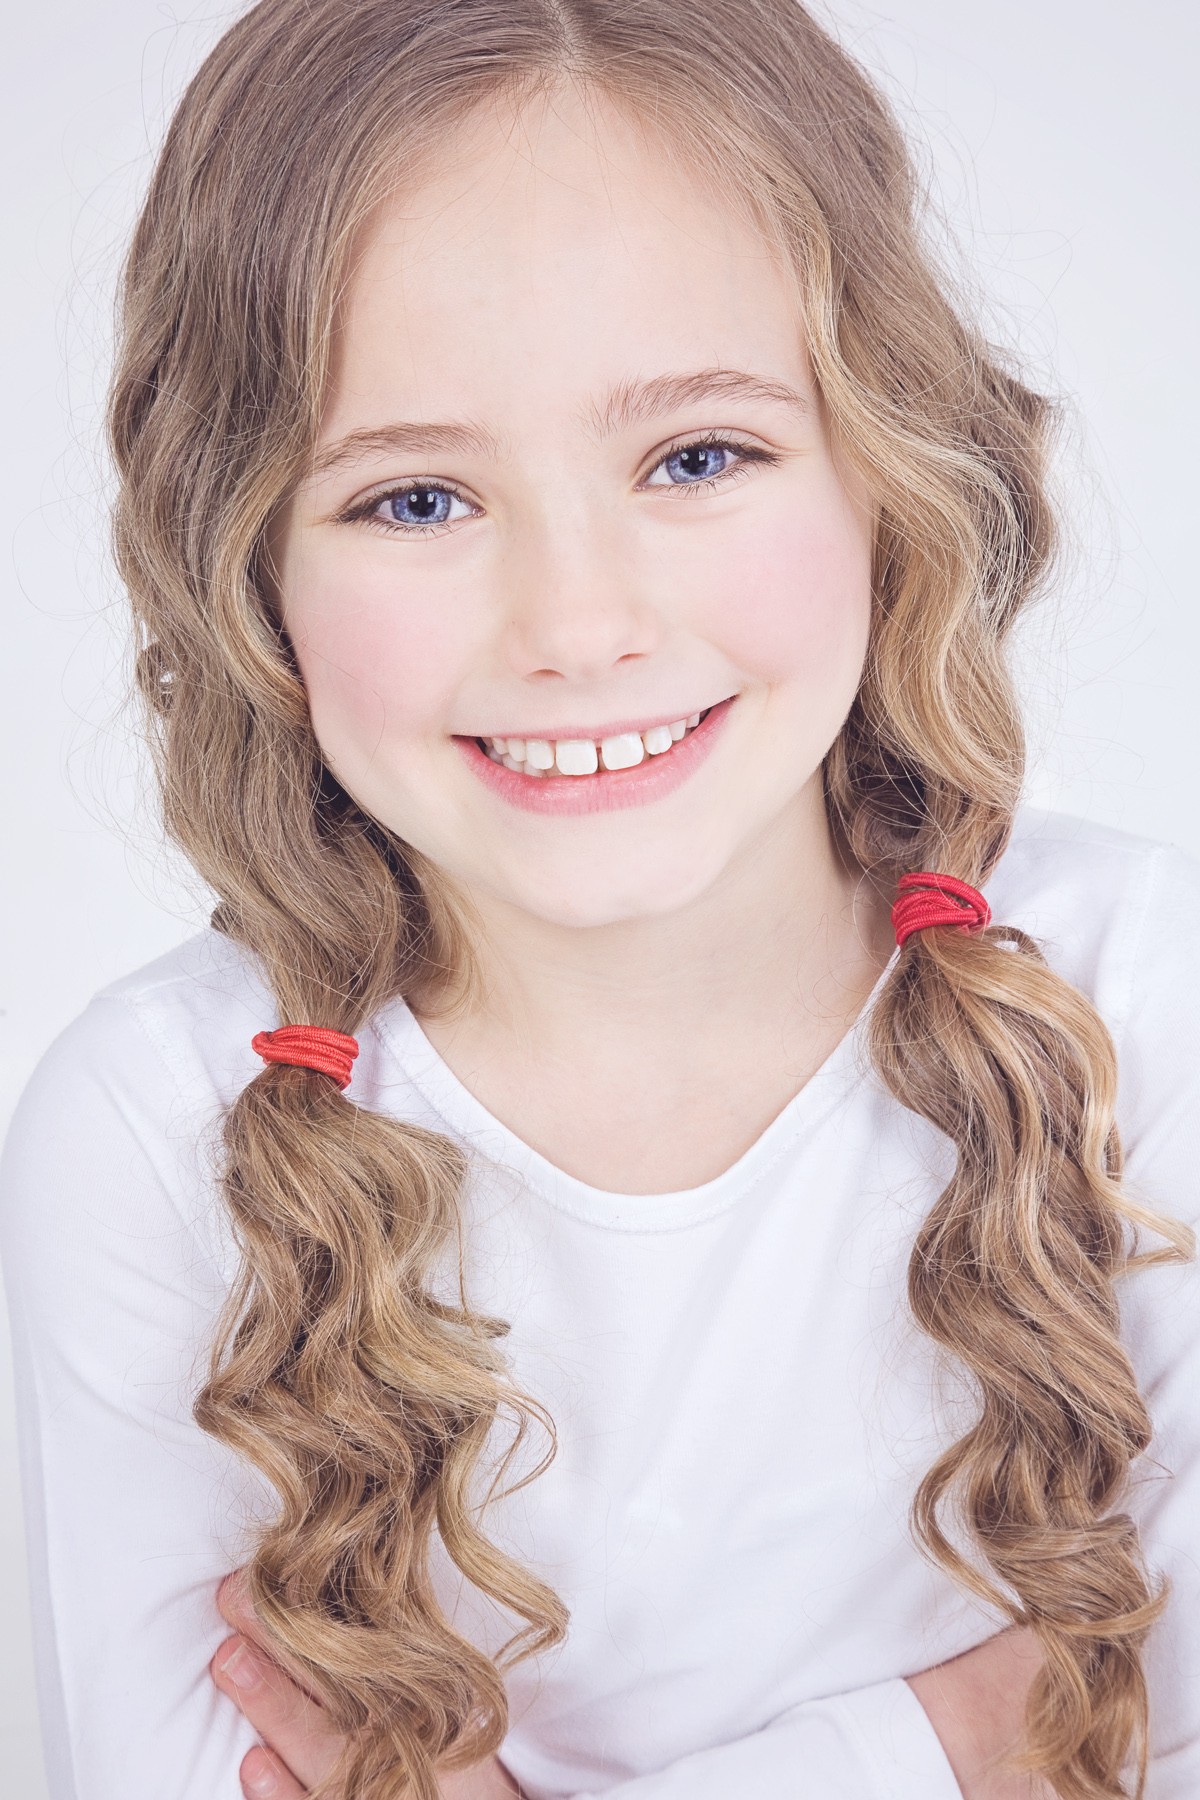 images-of-maddie-corman